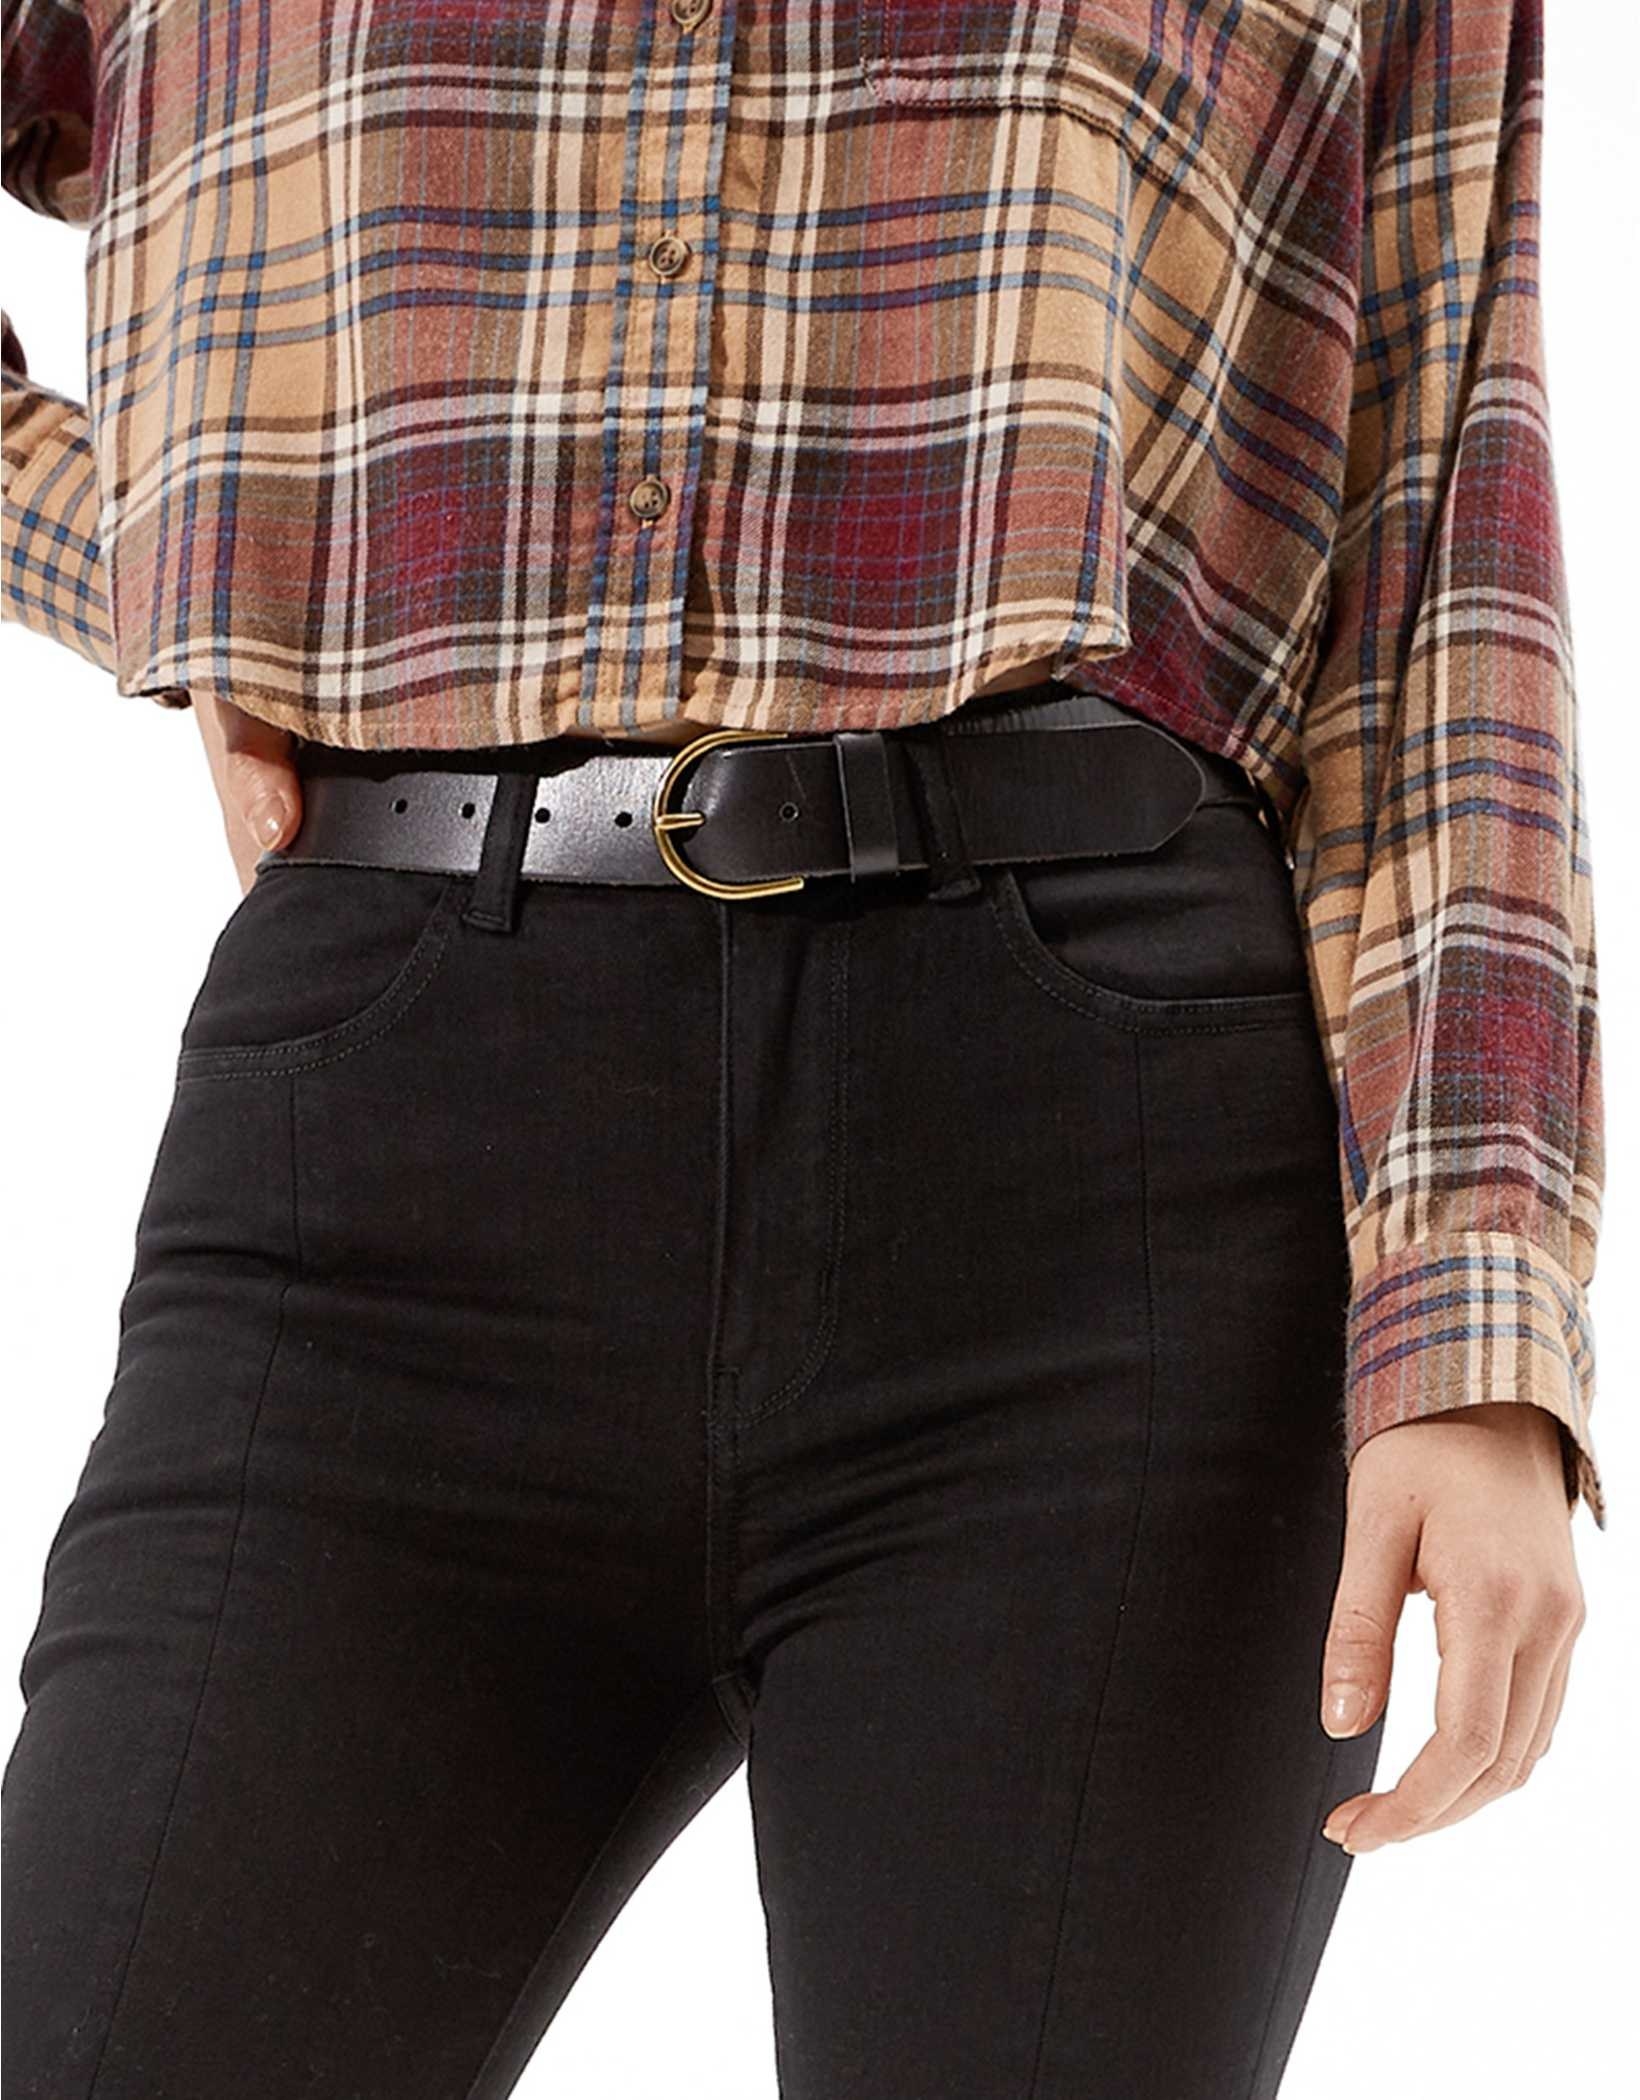 Model wearing the black belt with gold buckle with black jeans and a flannel